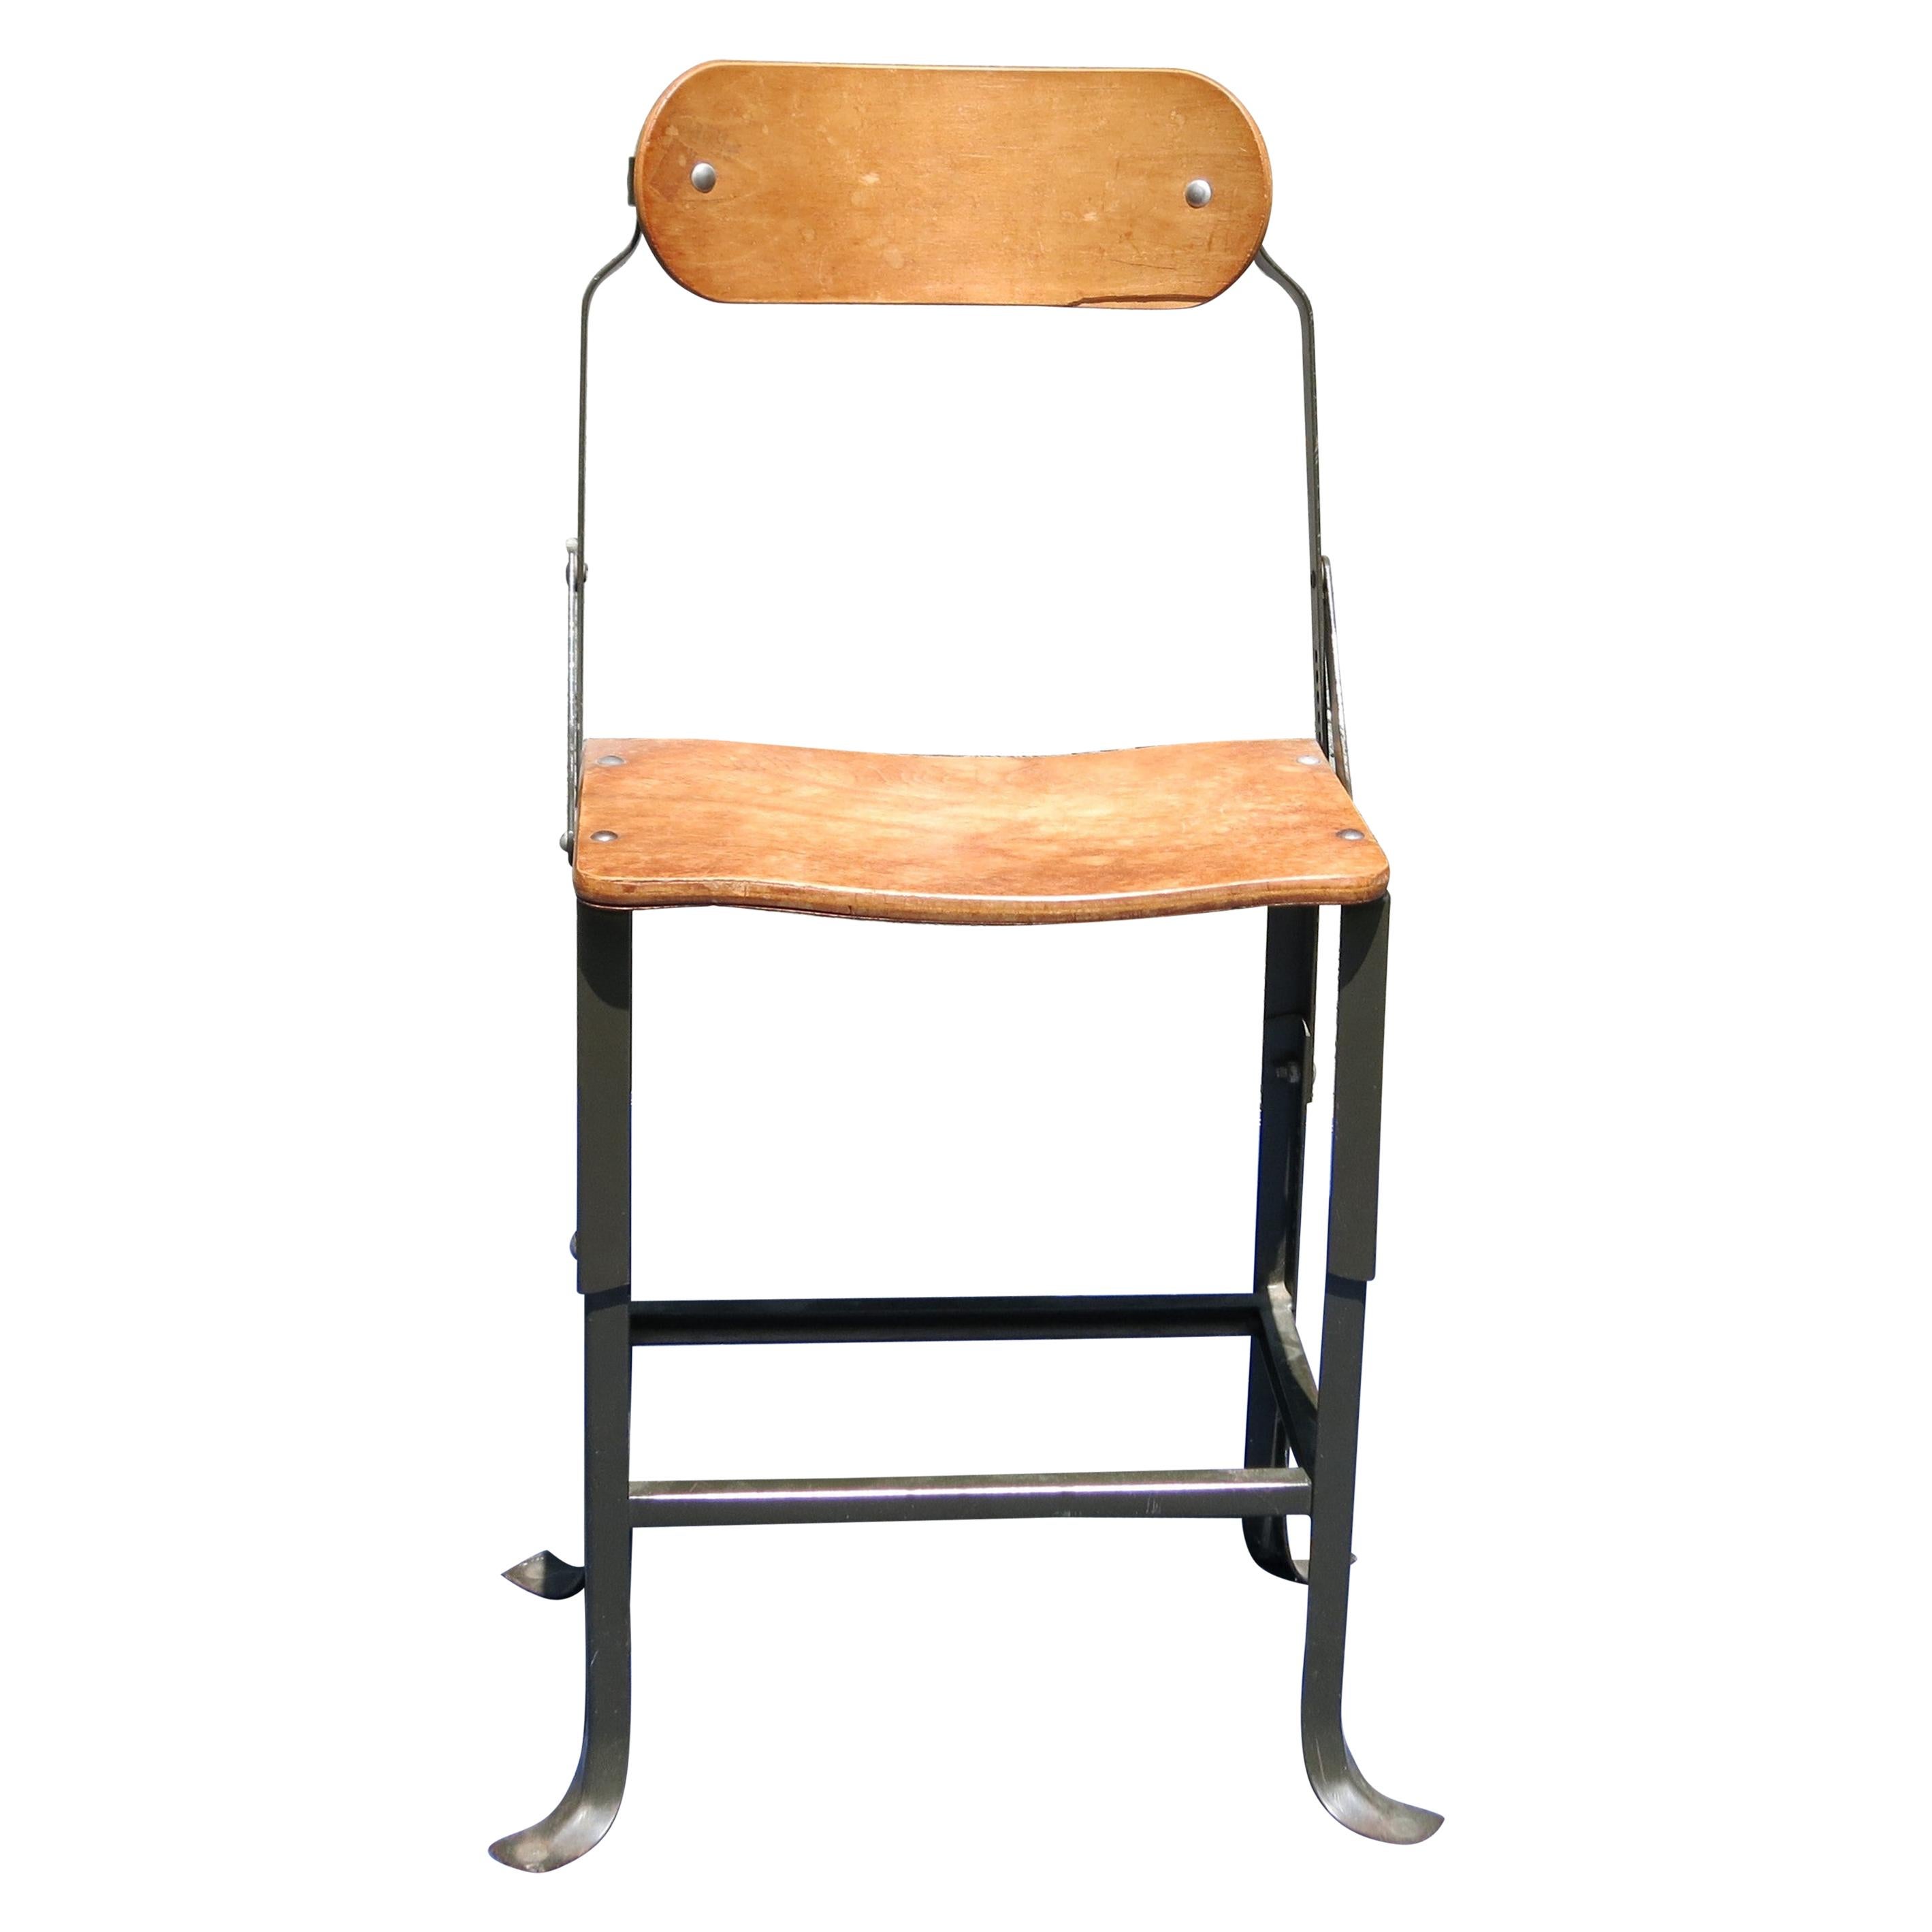 Industrial Bent Plywood Chair Adjustable For Sale